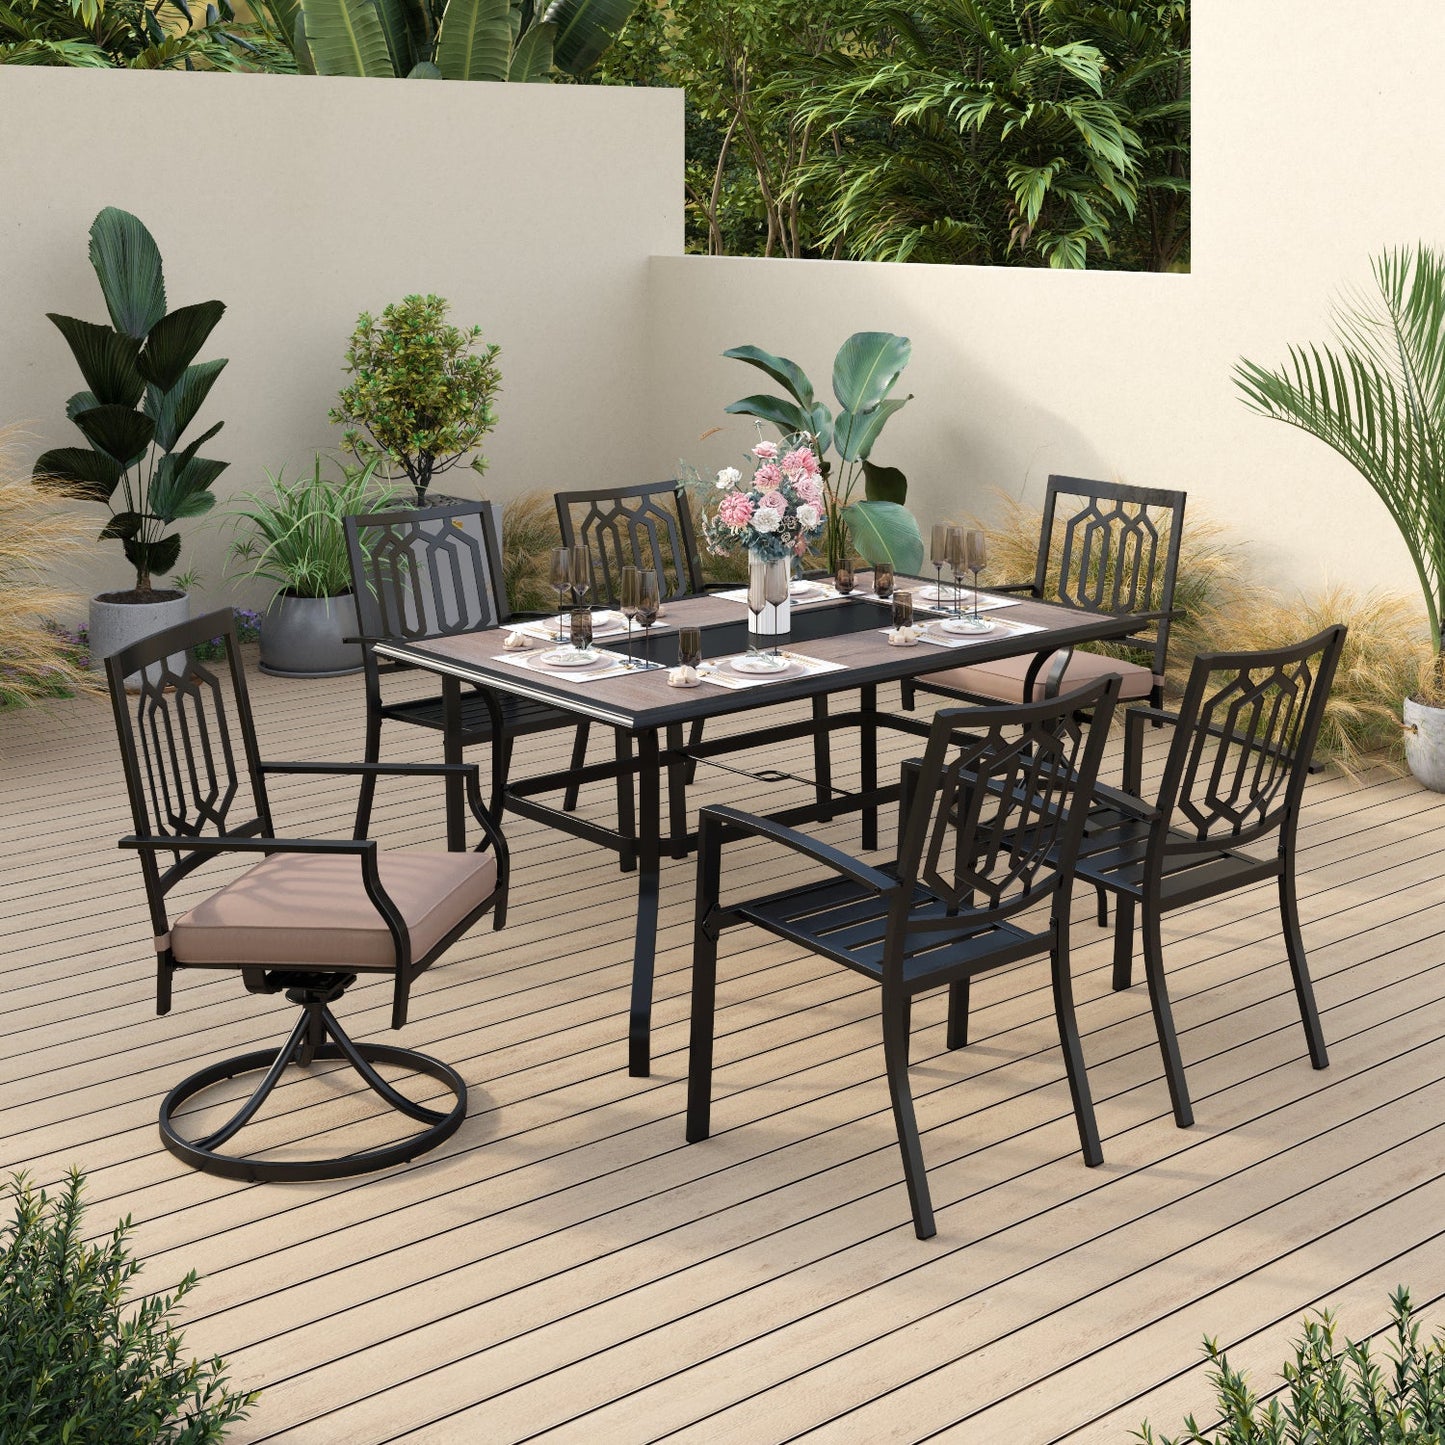 Sophia & William 7 Piece Outdoor Patio Dining Bistro Set 1 Retangular Table and 5 Metal Stackable Chairs&1 Swivel Dining Chair